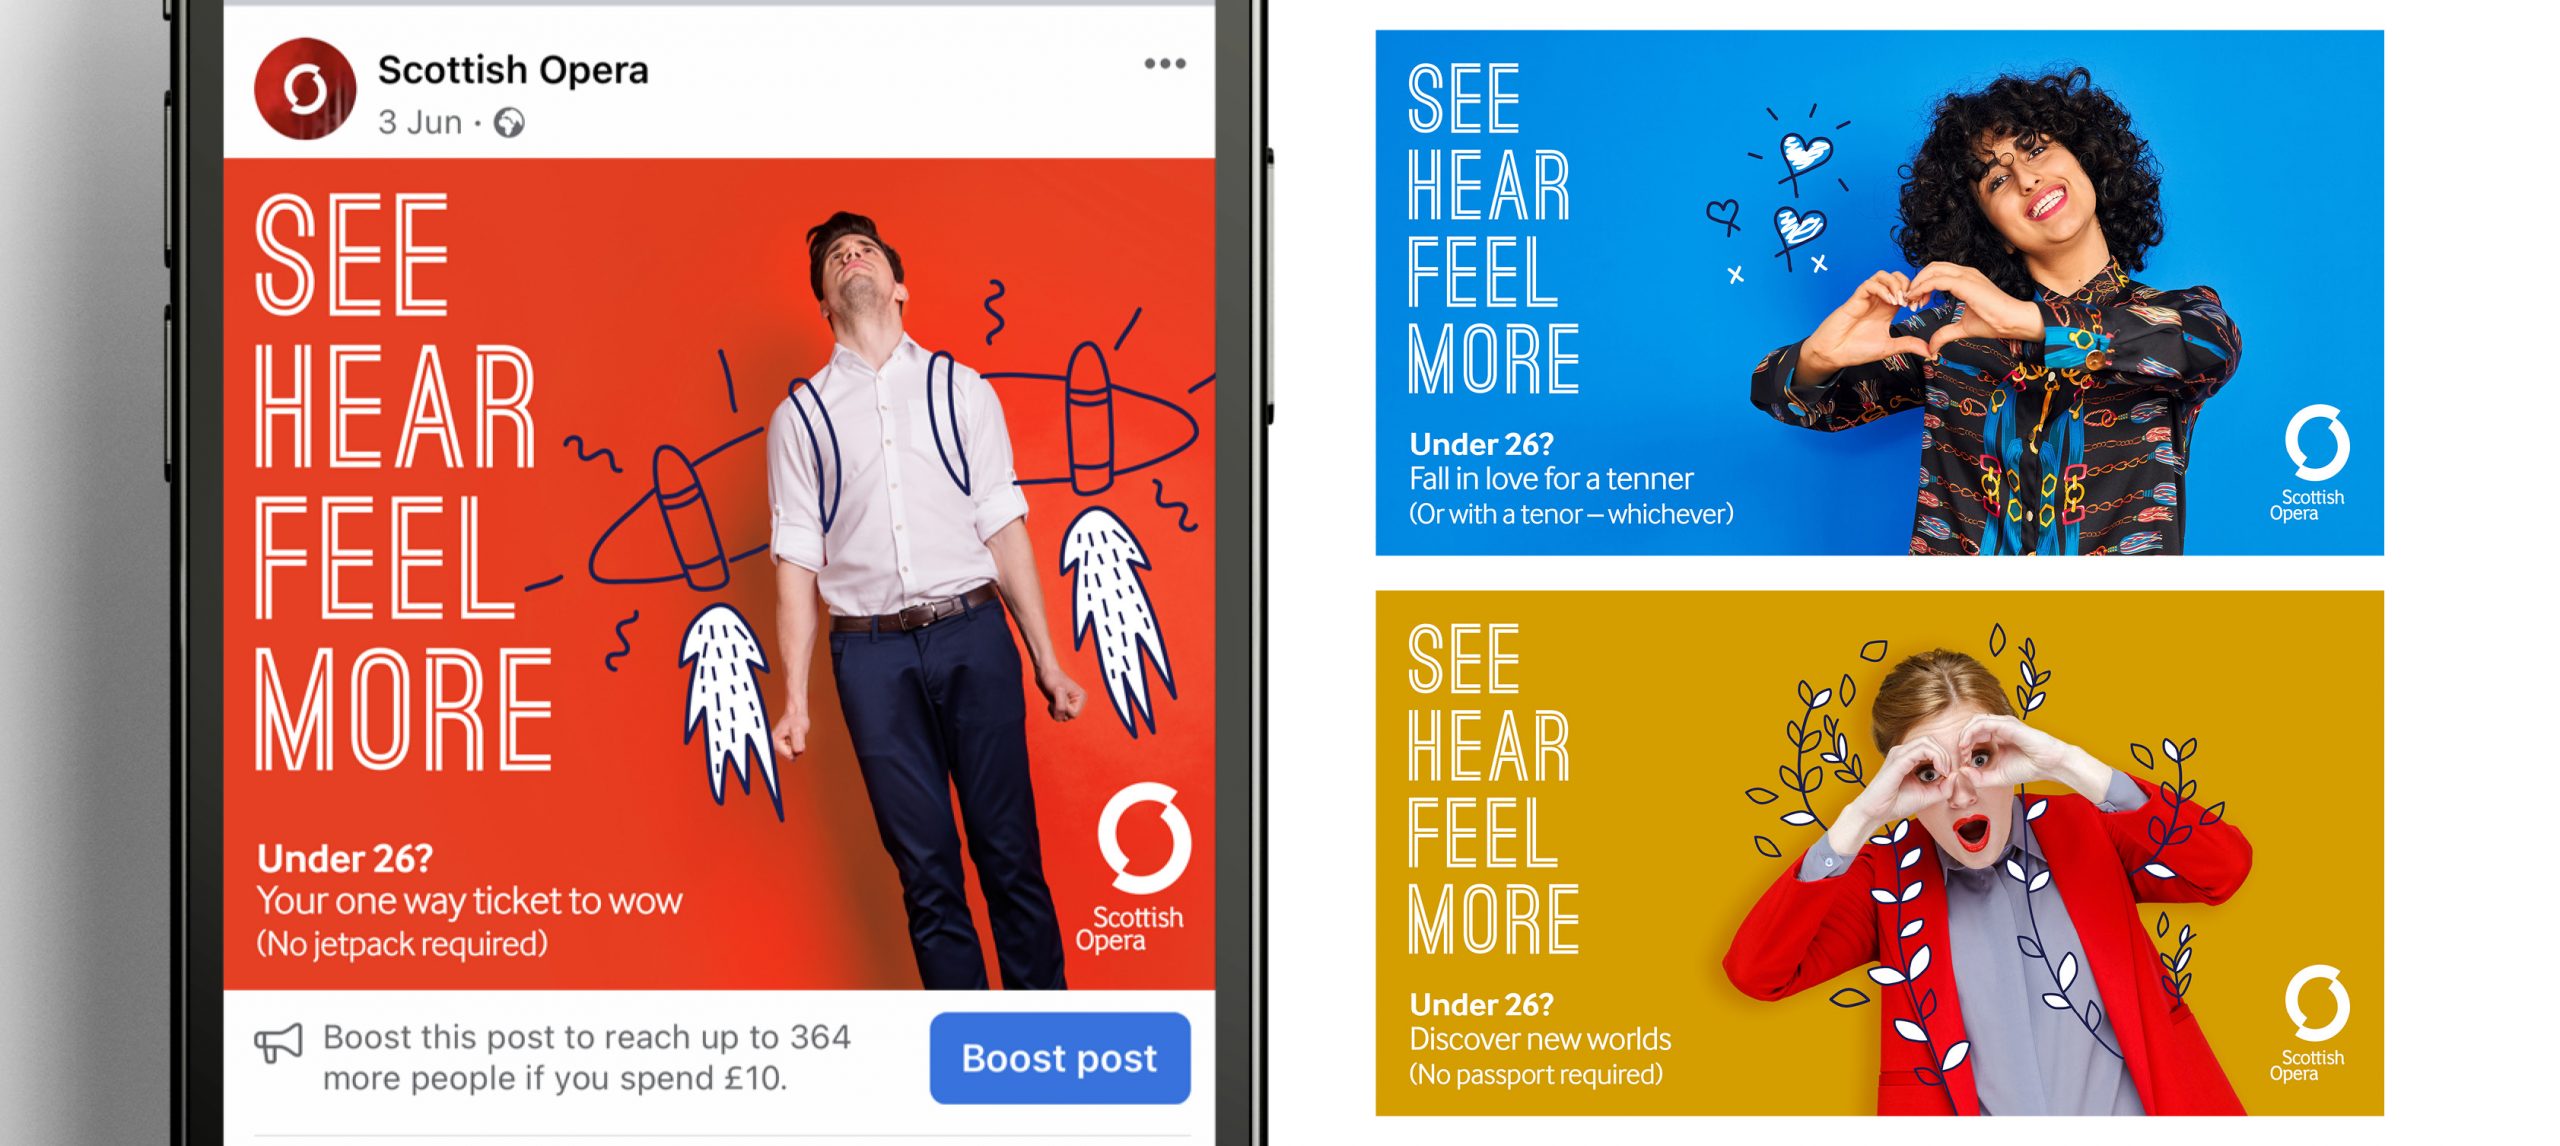 Social media advertising showing the 'See, hear, feel more' campaign to encourage under 26 audiences to attend opera performances.